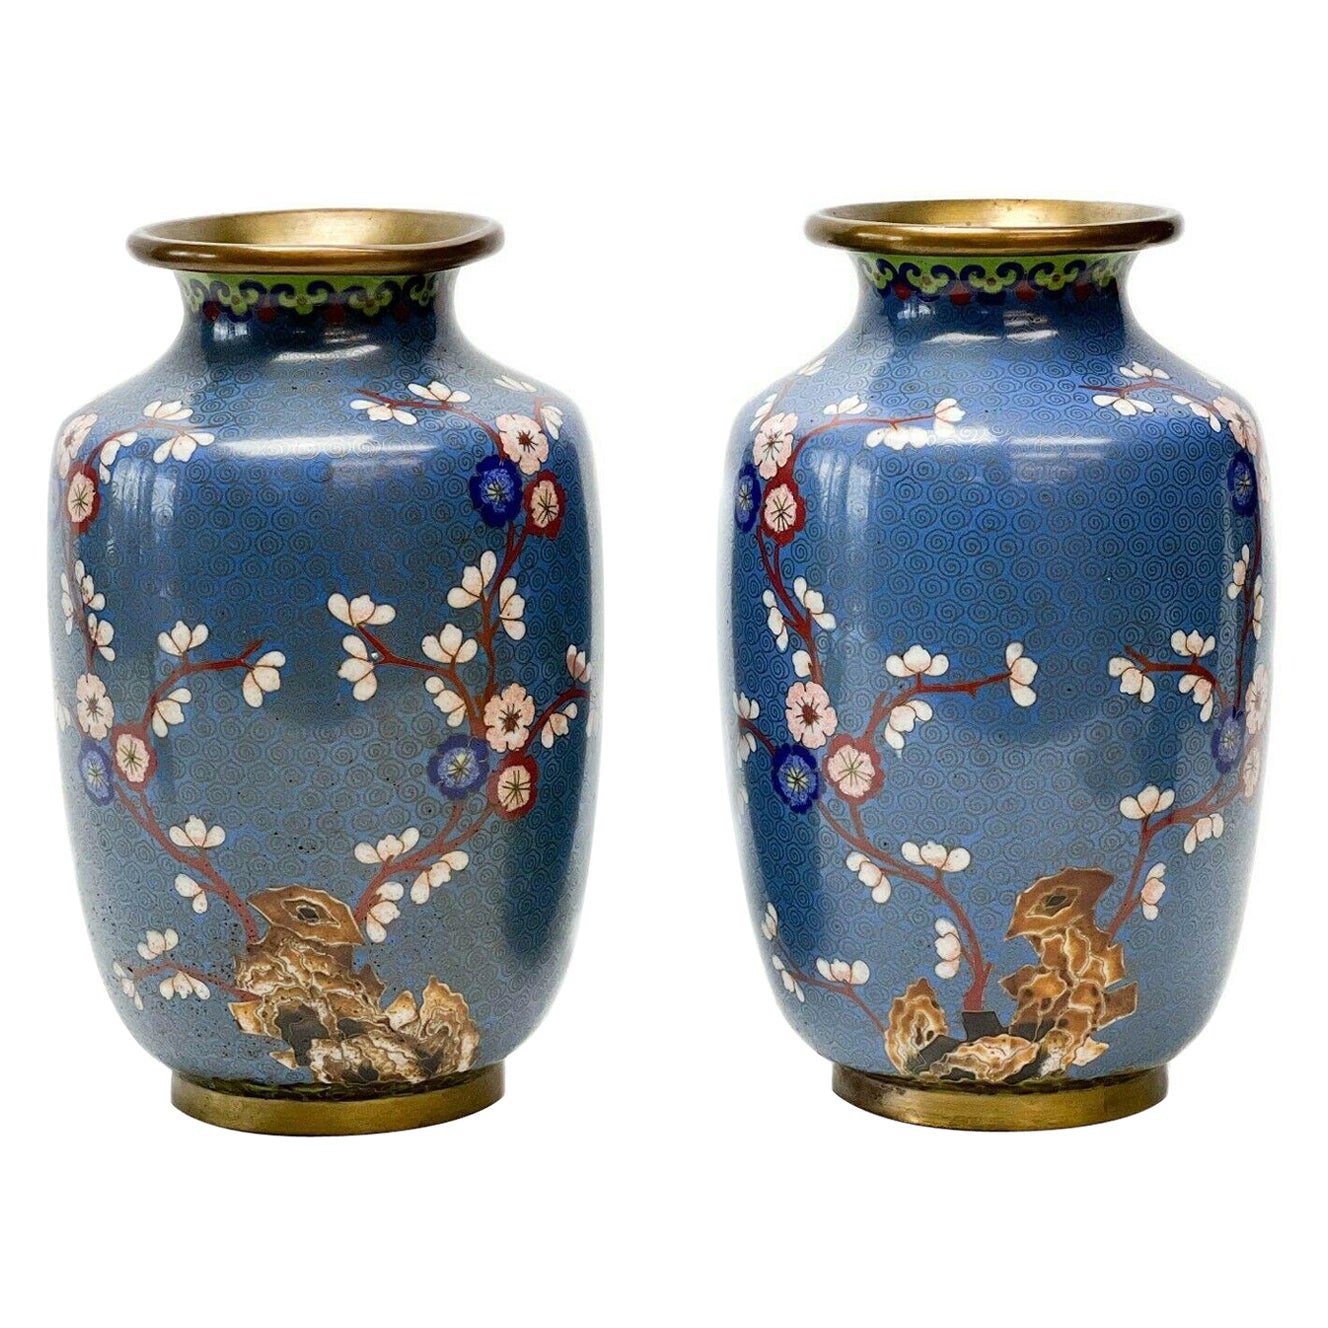 Pair of Chinese Cloisonne Enamel Enamel and Bronze Mounted Vases Penny Marshall For Sale